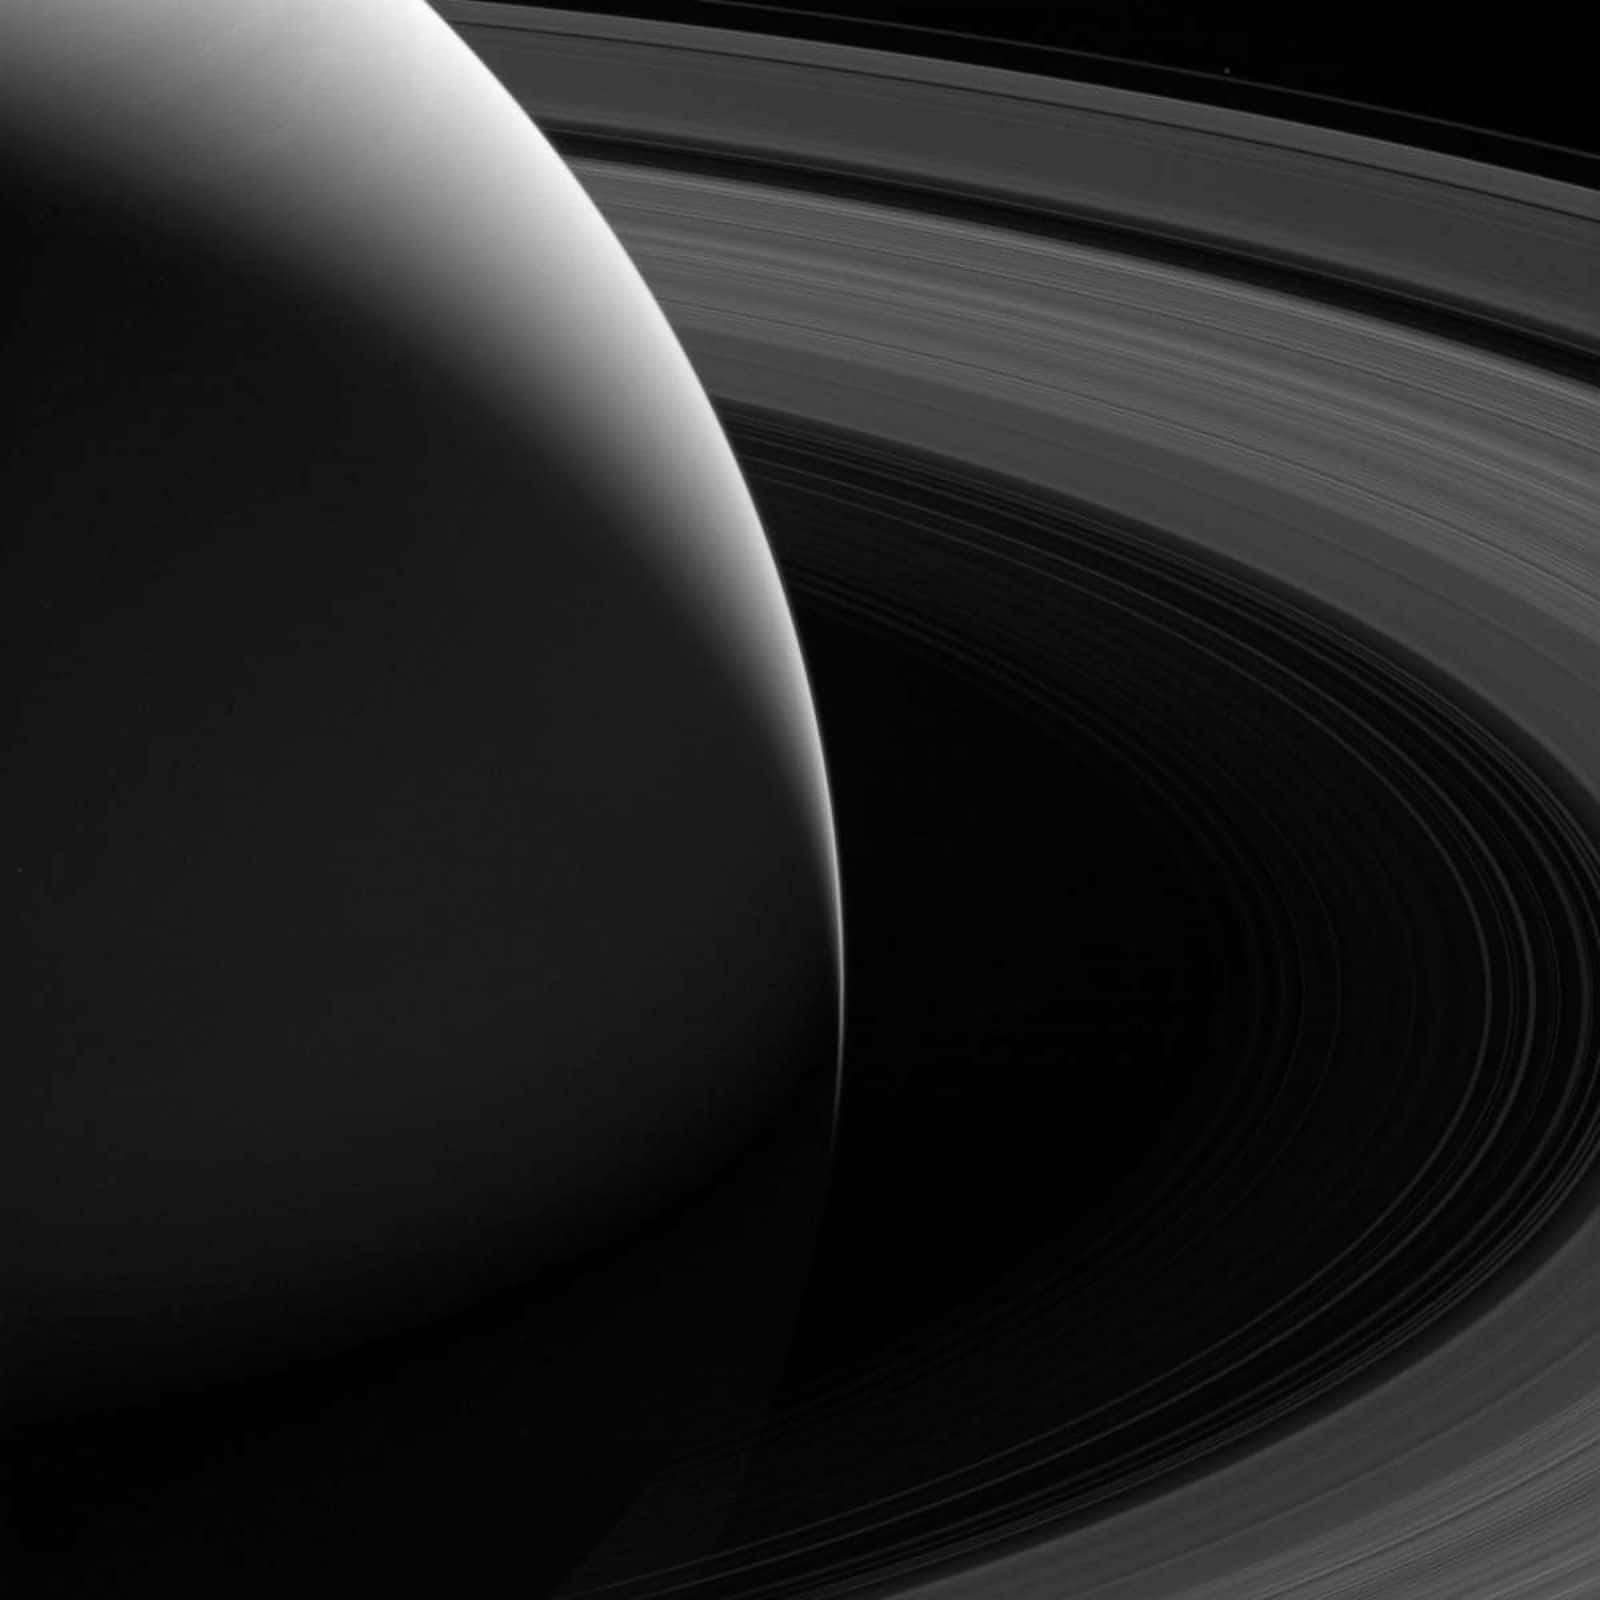 An up-close view of the captivating planet Saturn